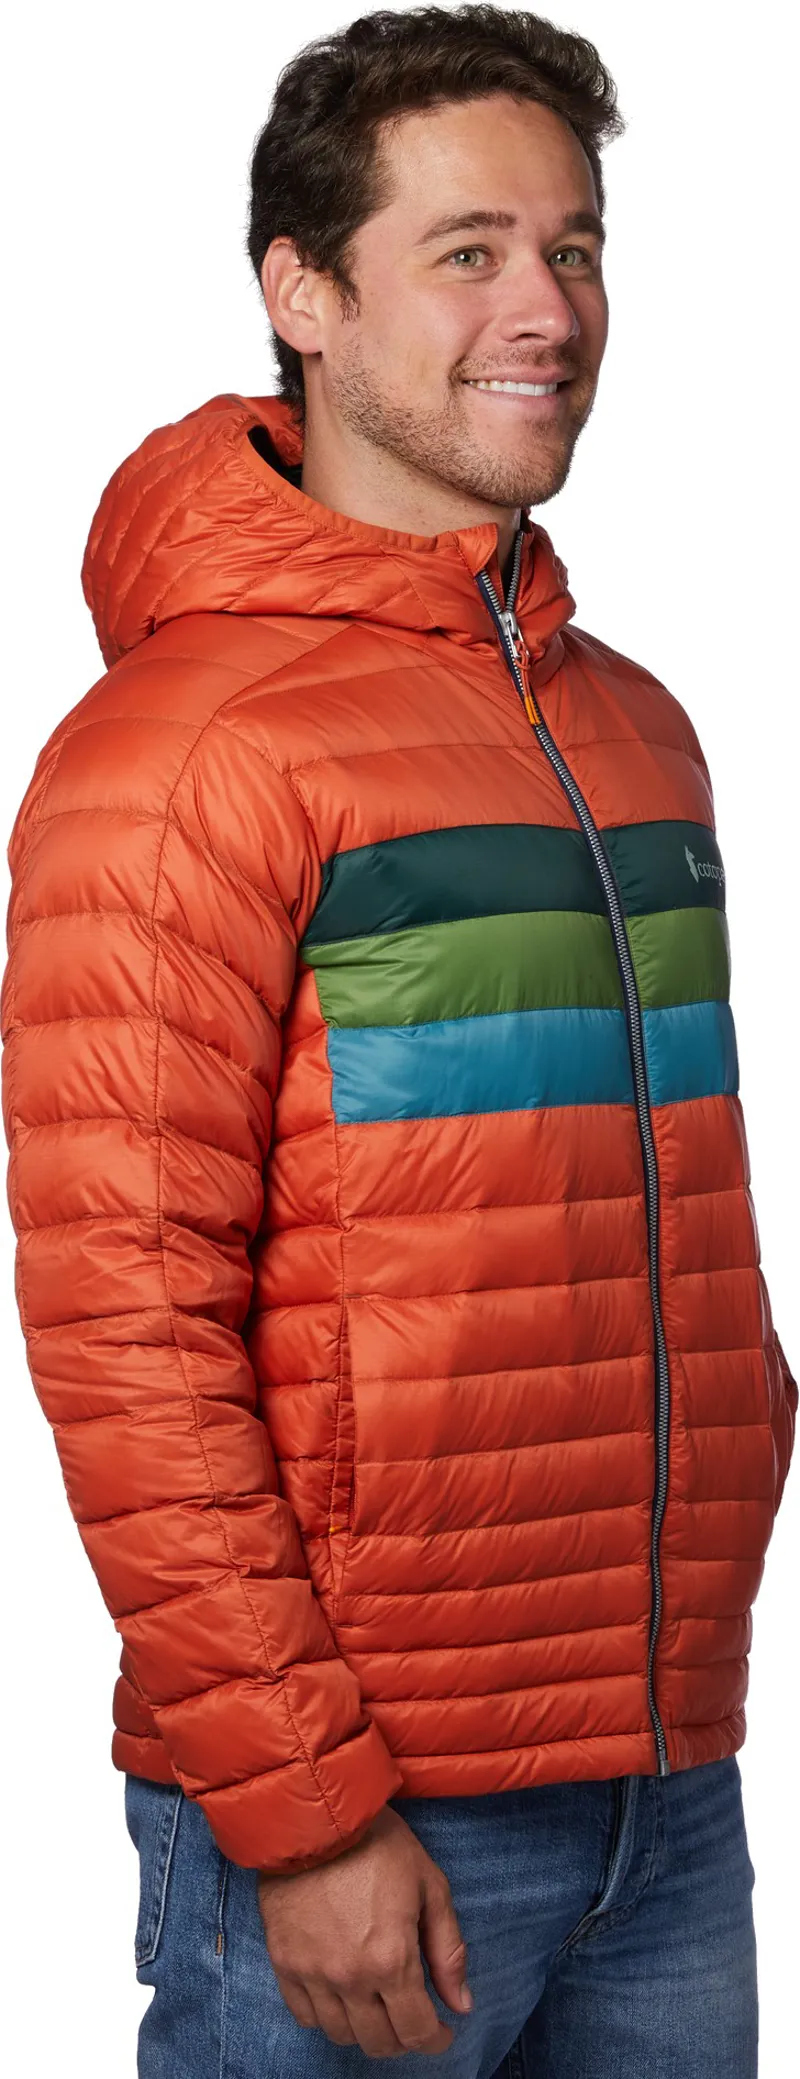 Download Cotopaxi Mens Fuego Down Hooded Jacket - Cayenne Stripes